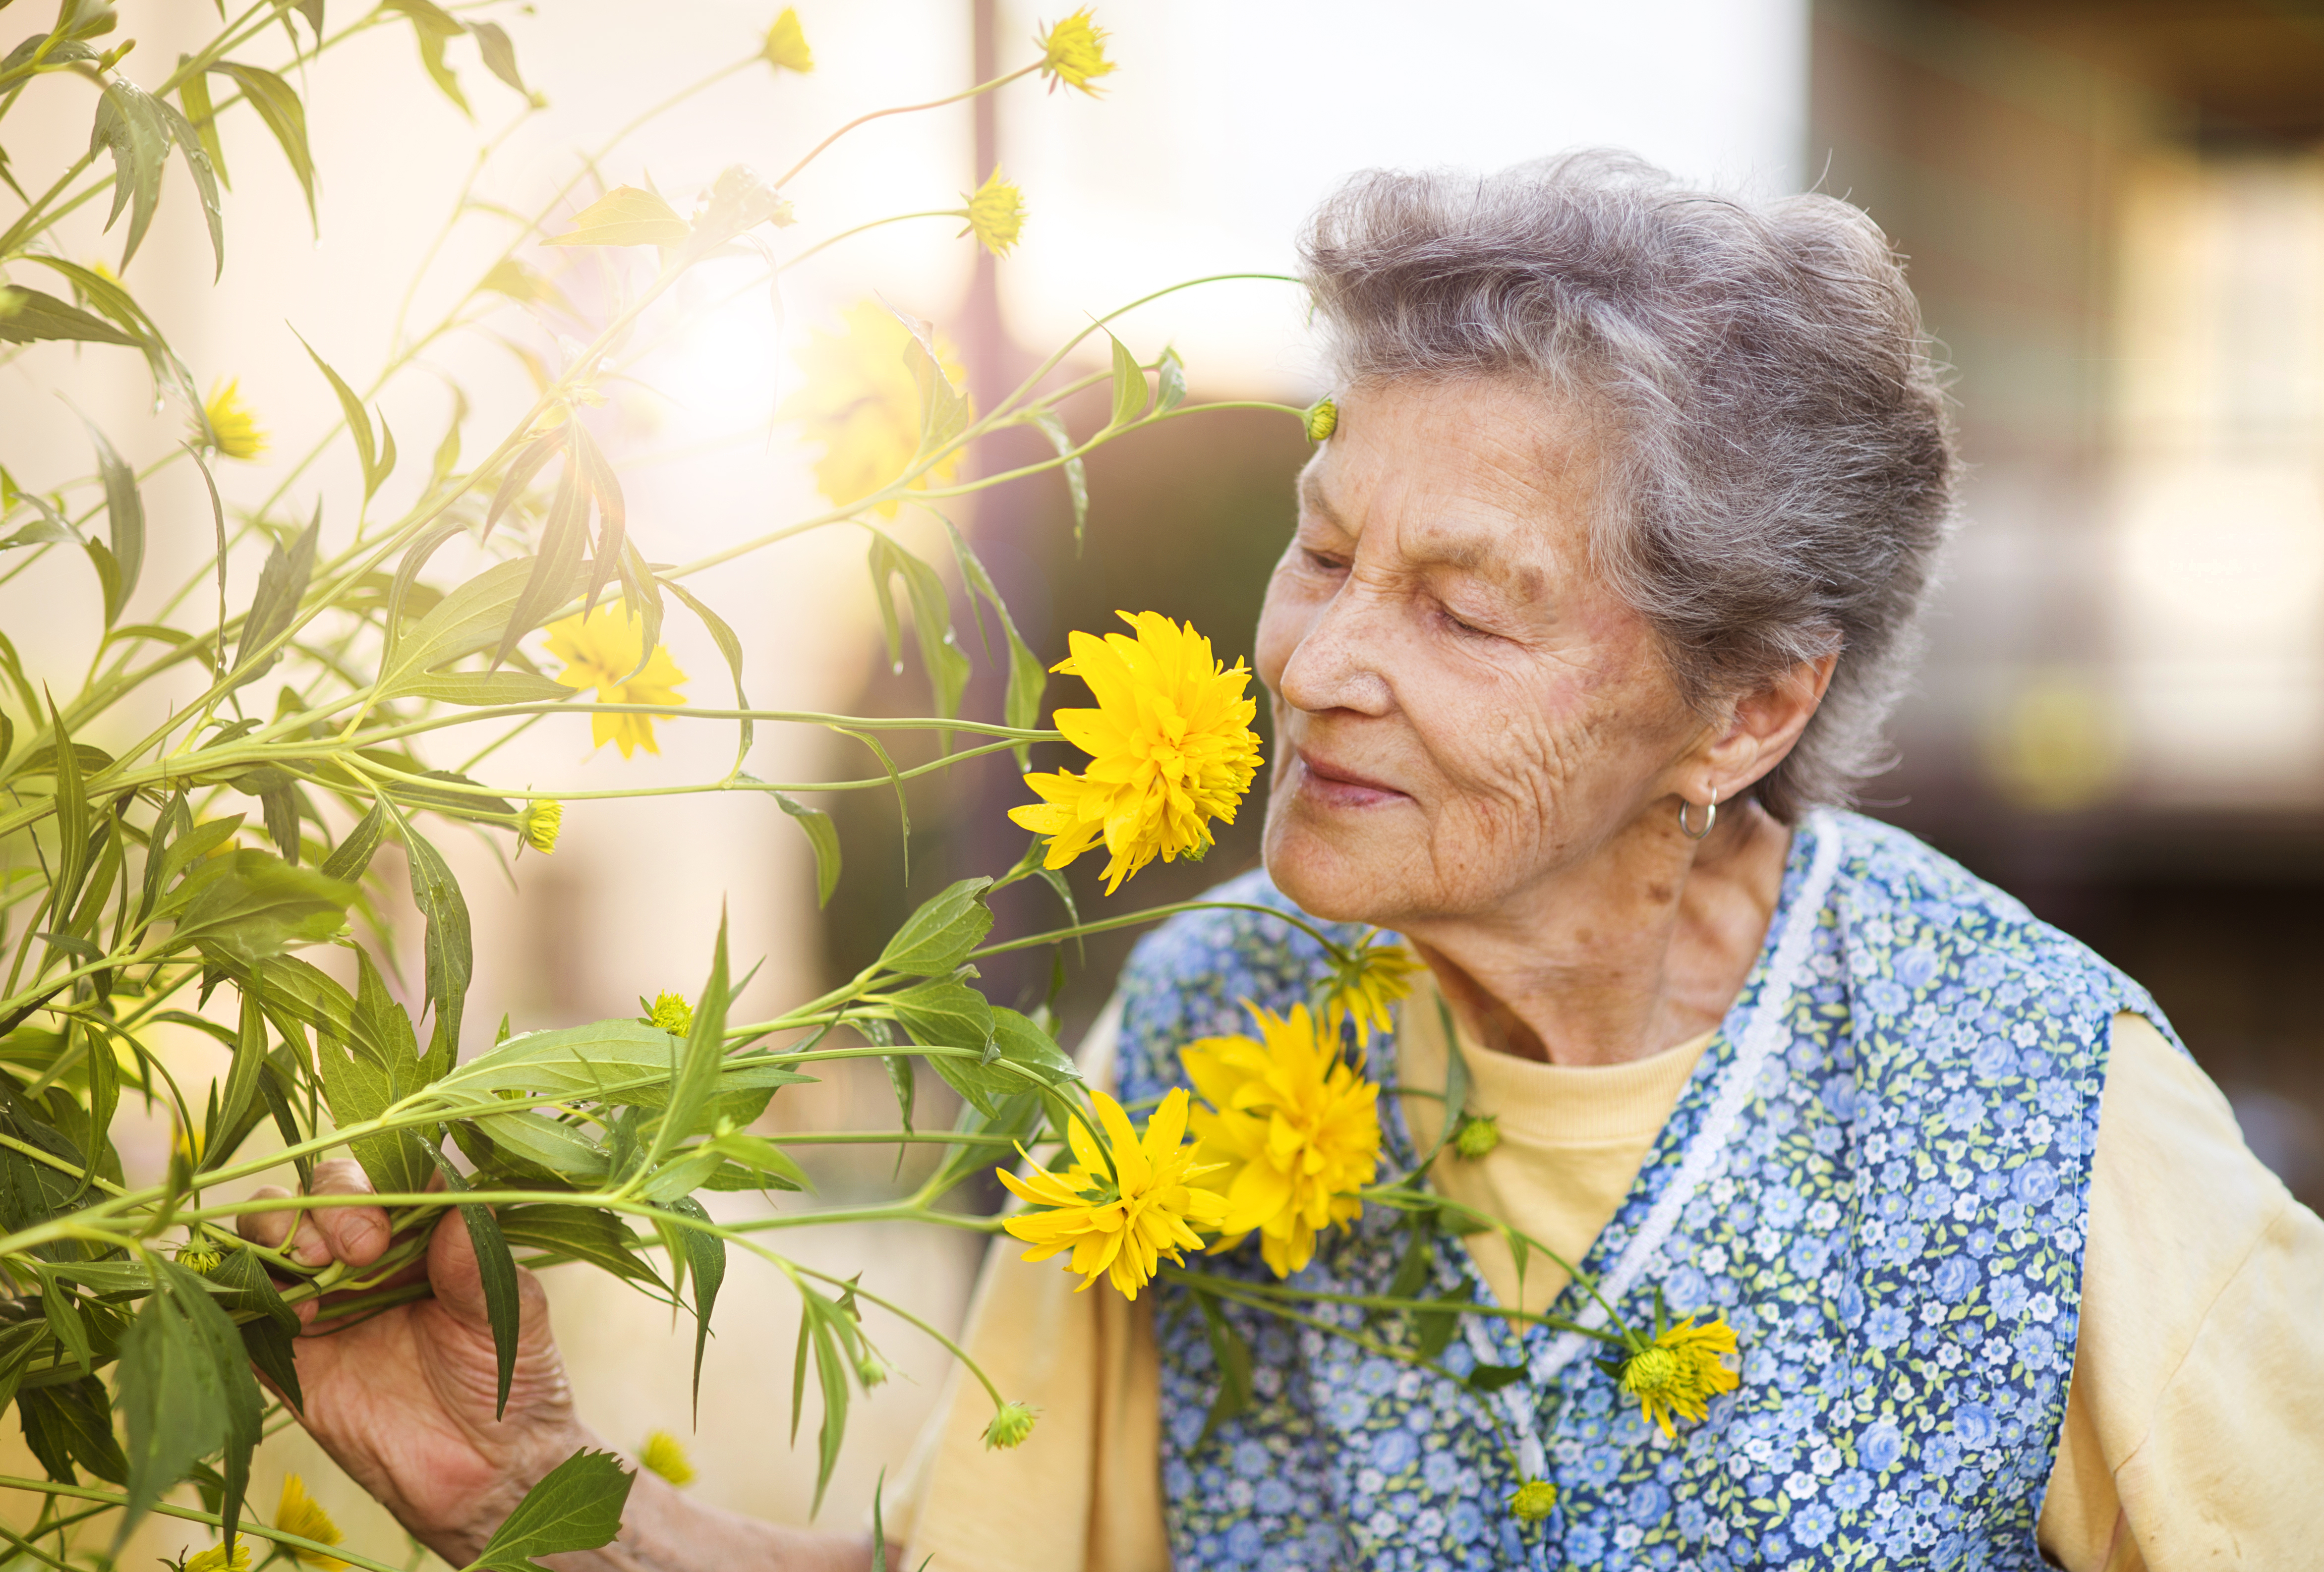 Elderly woman is smiling in the sunshine and sniffing a yellow flower